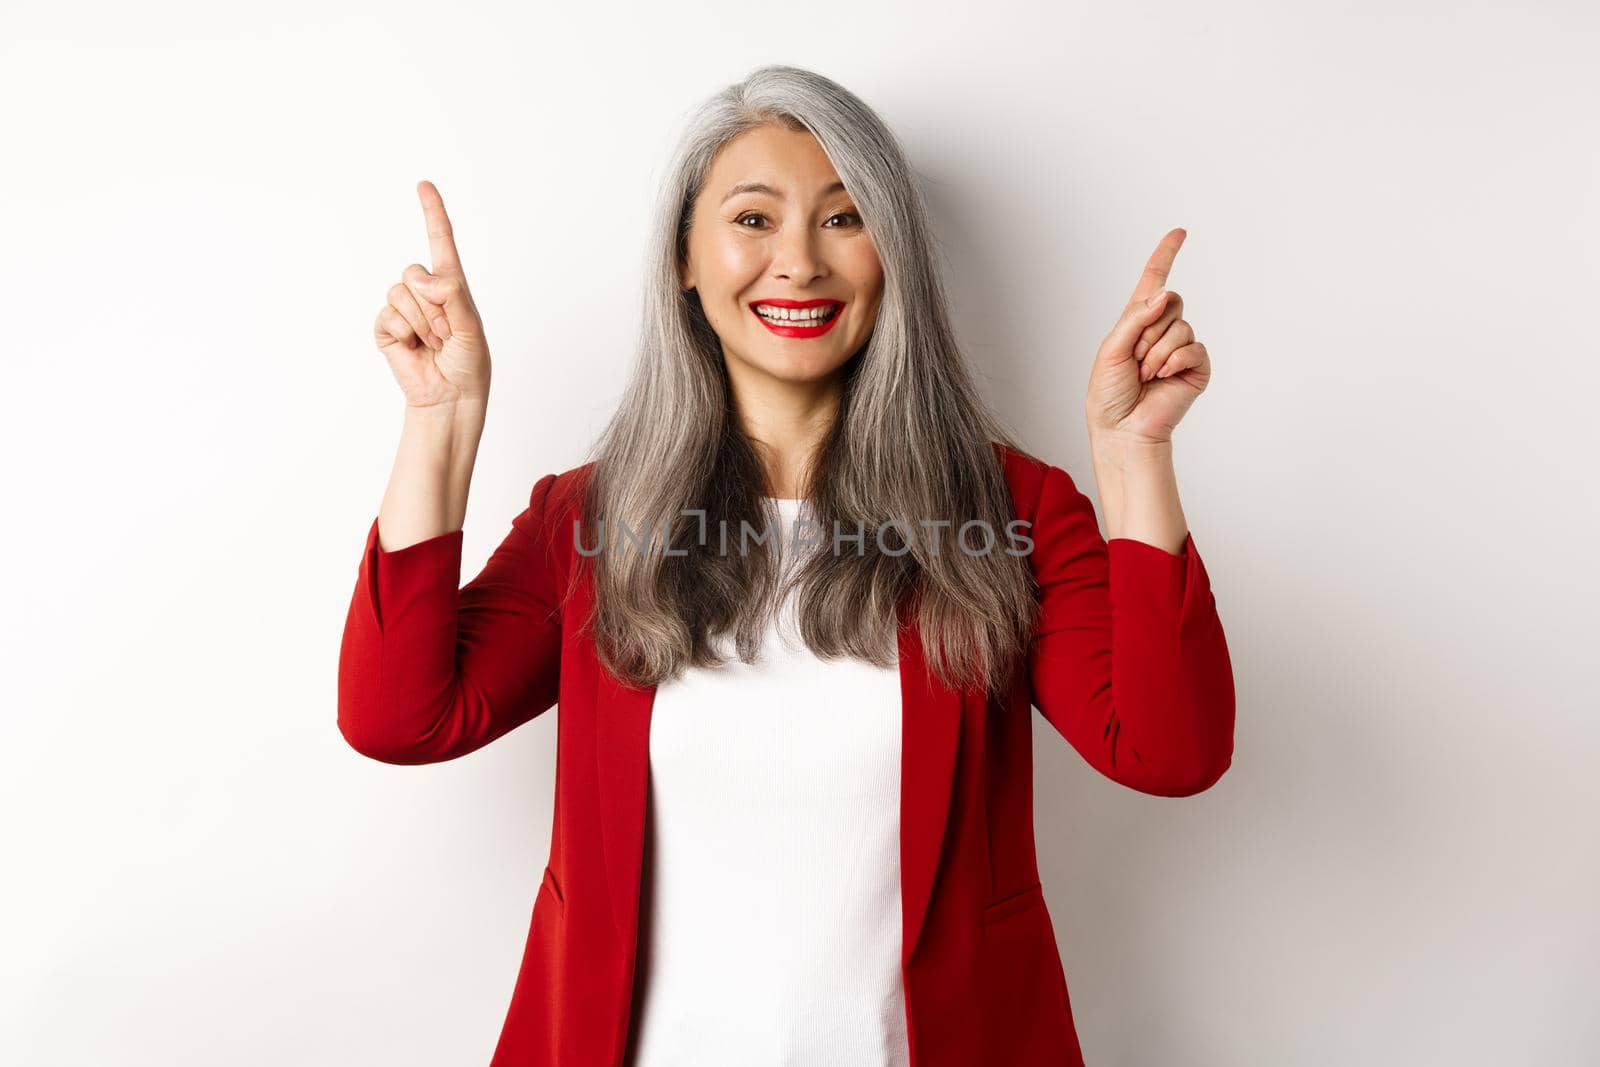 Happy mature woman in red blazer and makeup, smiling and showing advertisement on top, pointing fingers up at logo, white background.